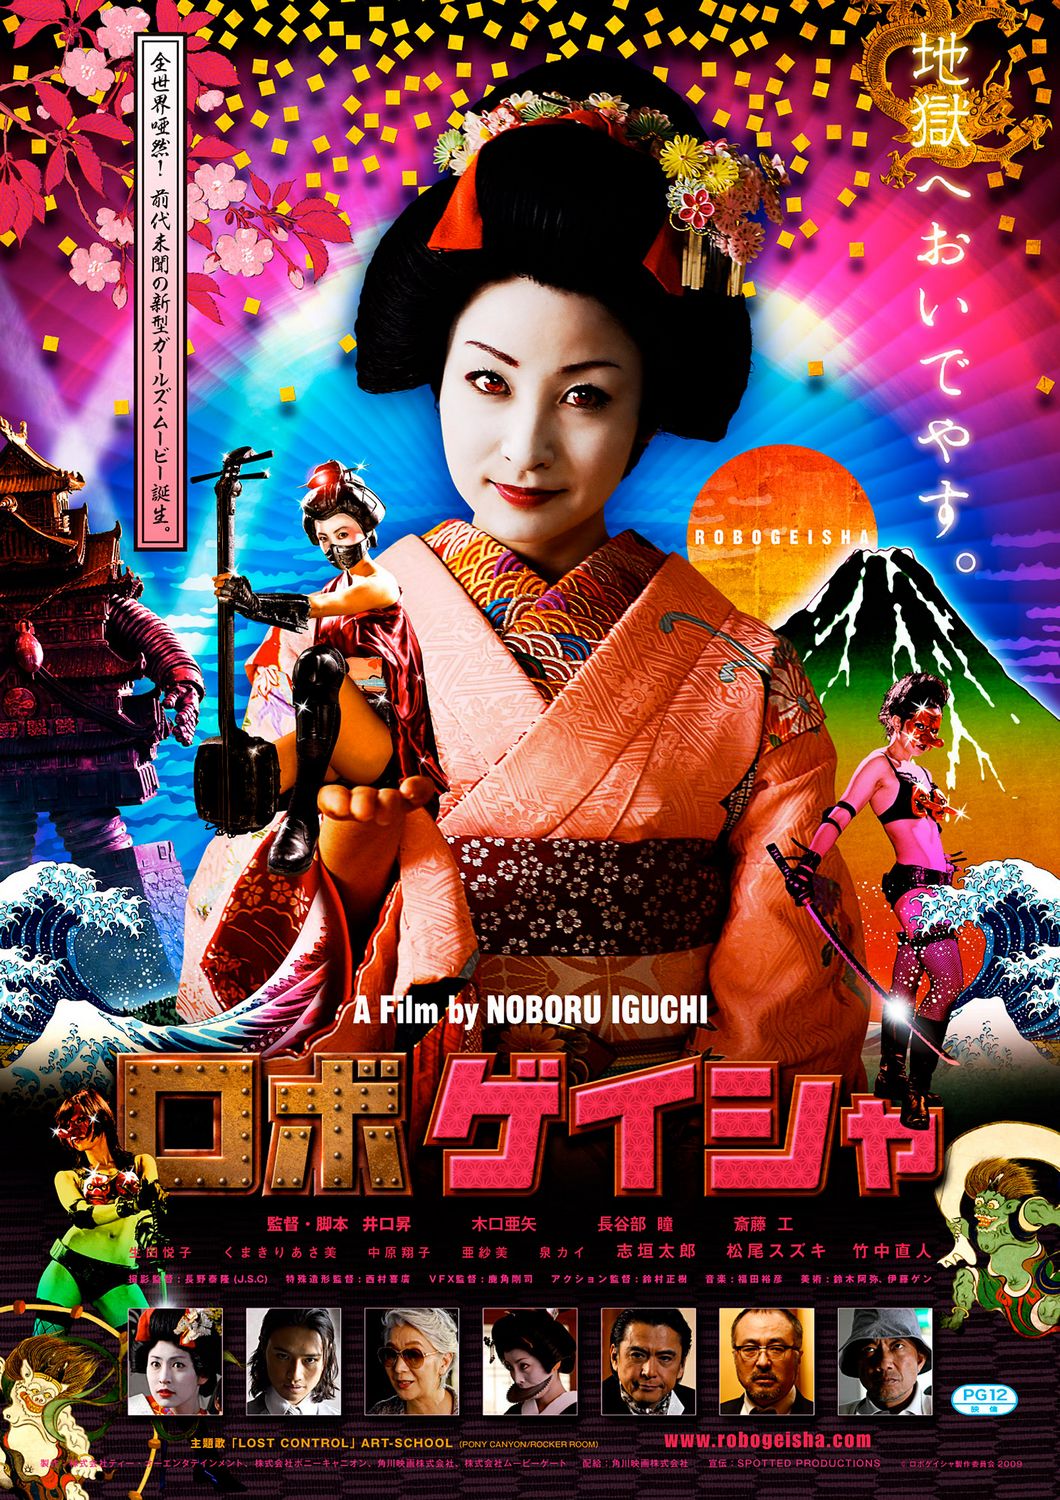 Extra Large Movie Poster Image for Robo-geisha (#2 of 2)